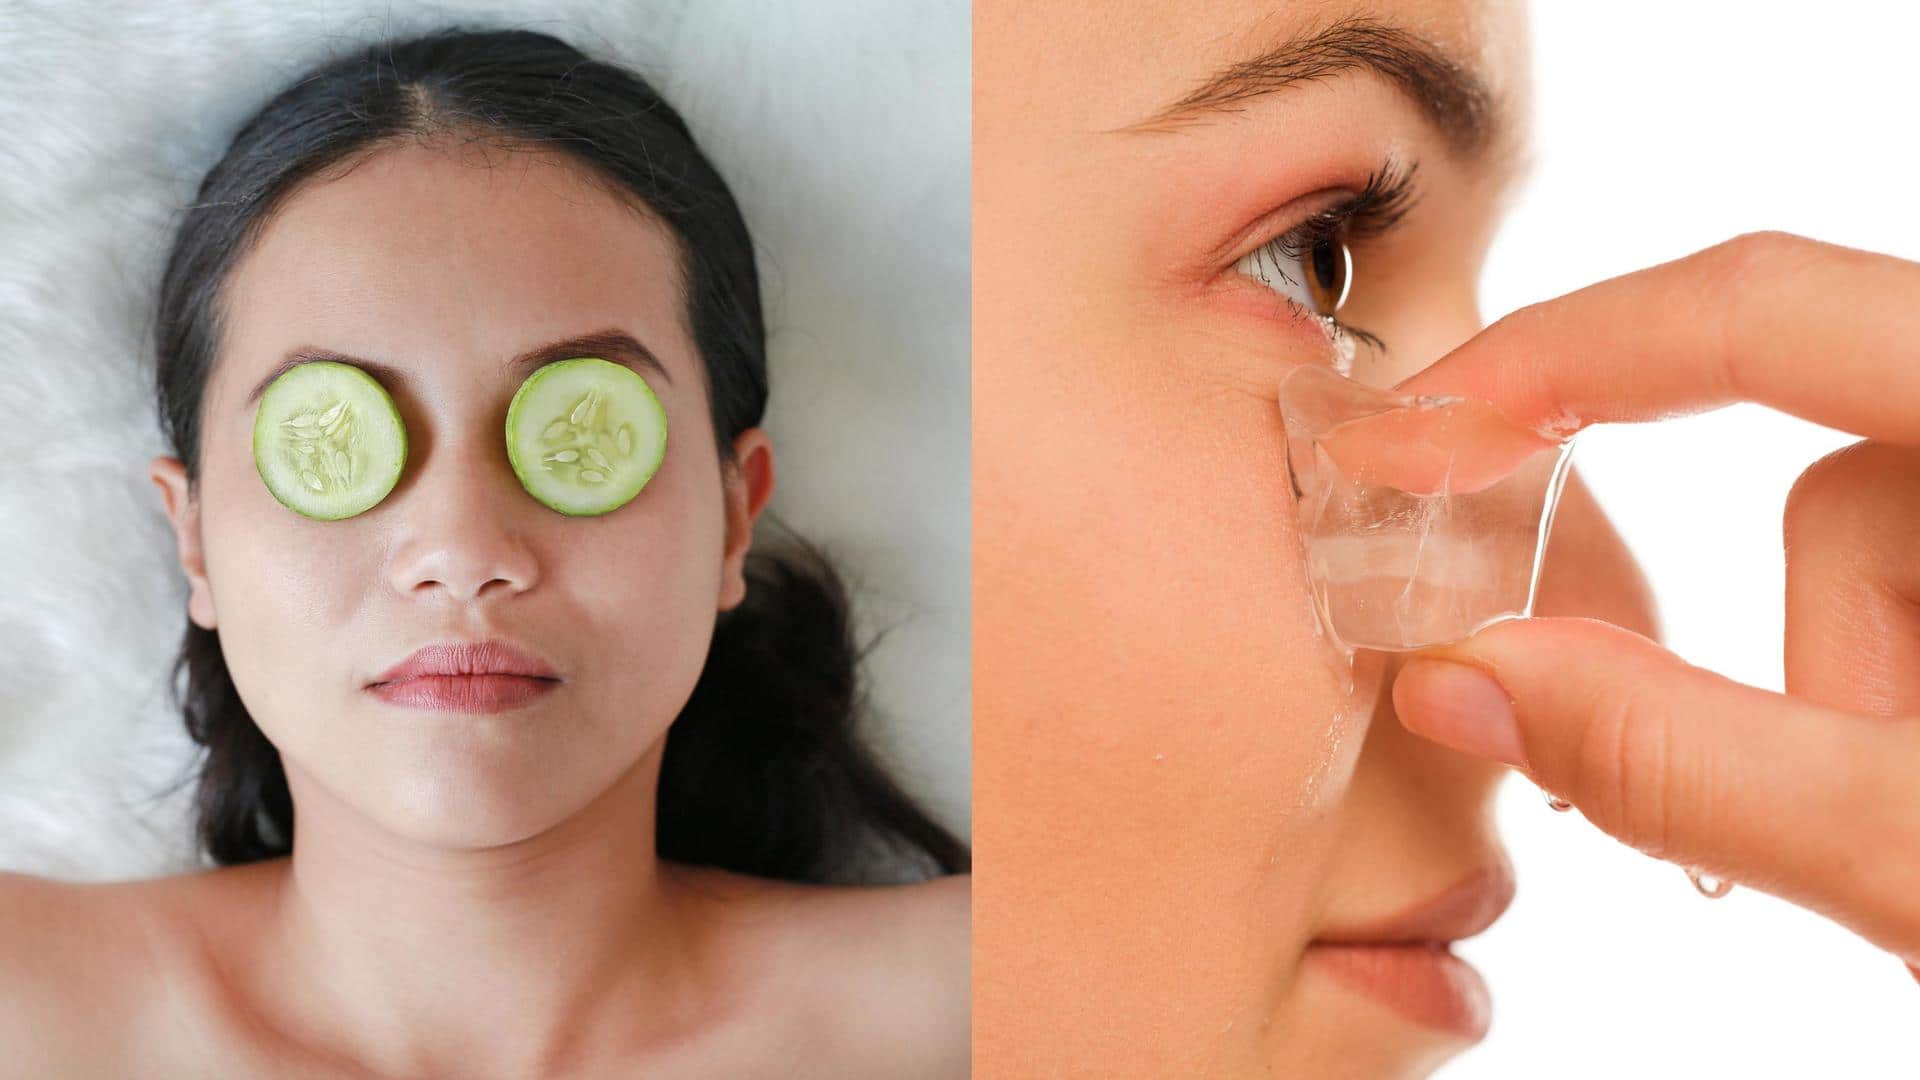 Under-eye bags: Home remedies to get rid of them